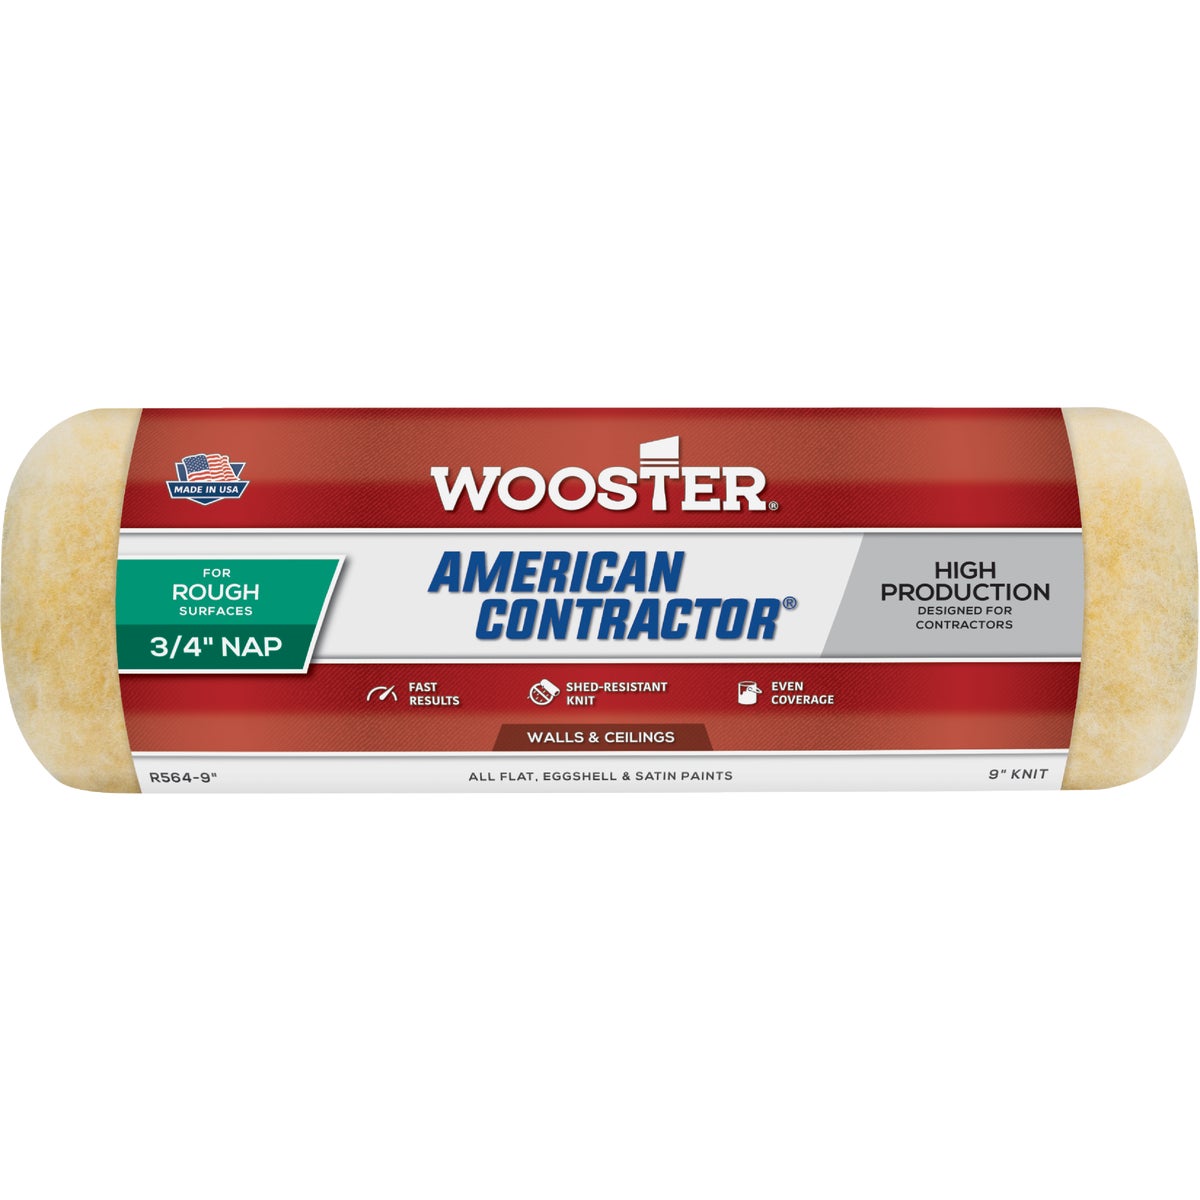 Wooster American Contractor 9 In. x 3/4 In. Knit Fabric Roller Cover